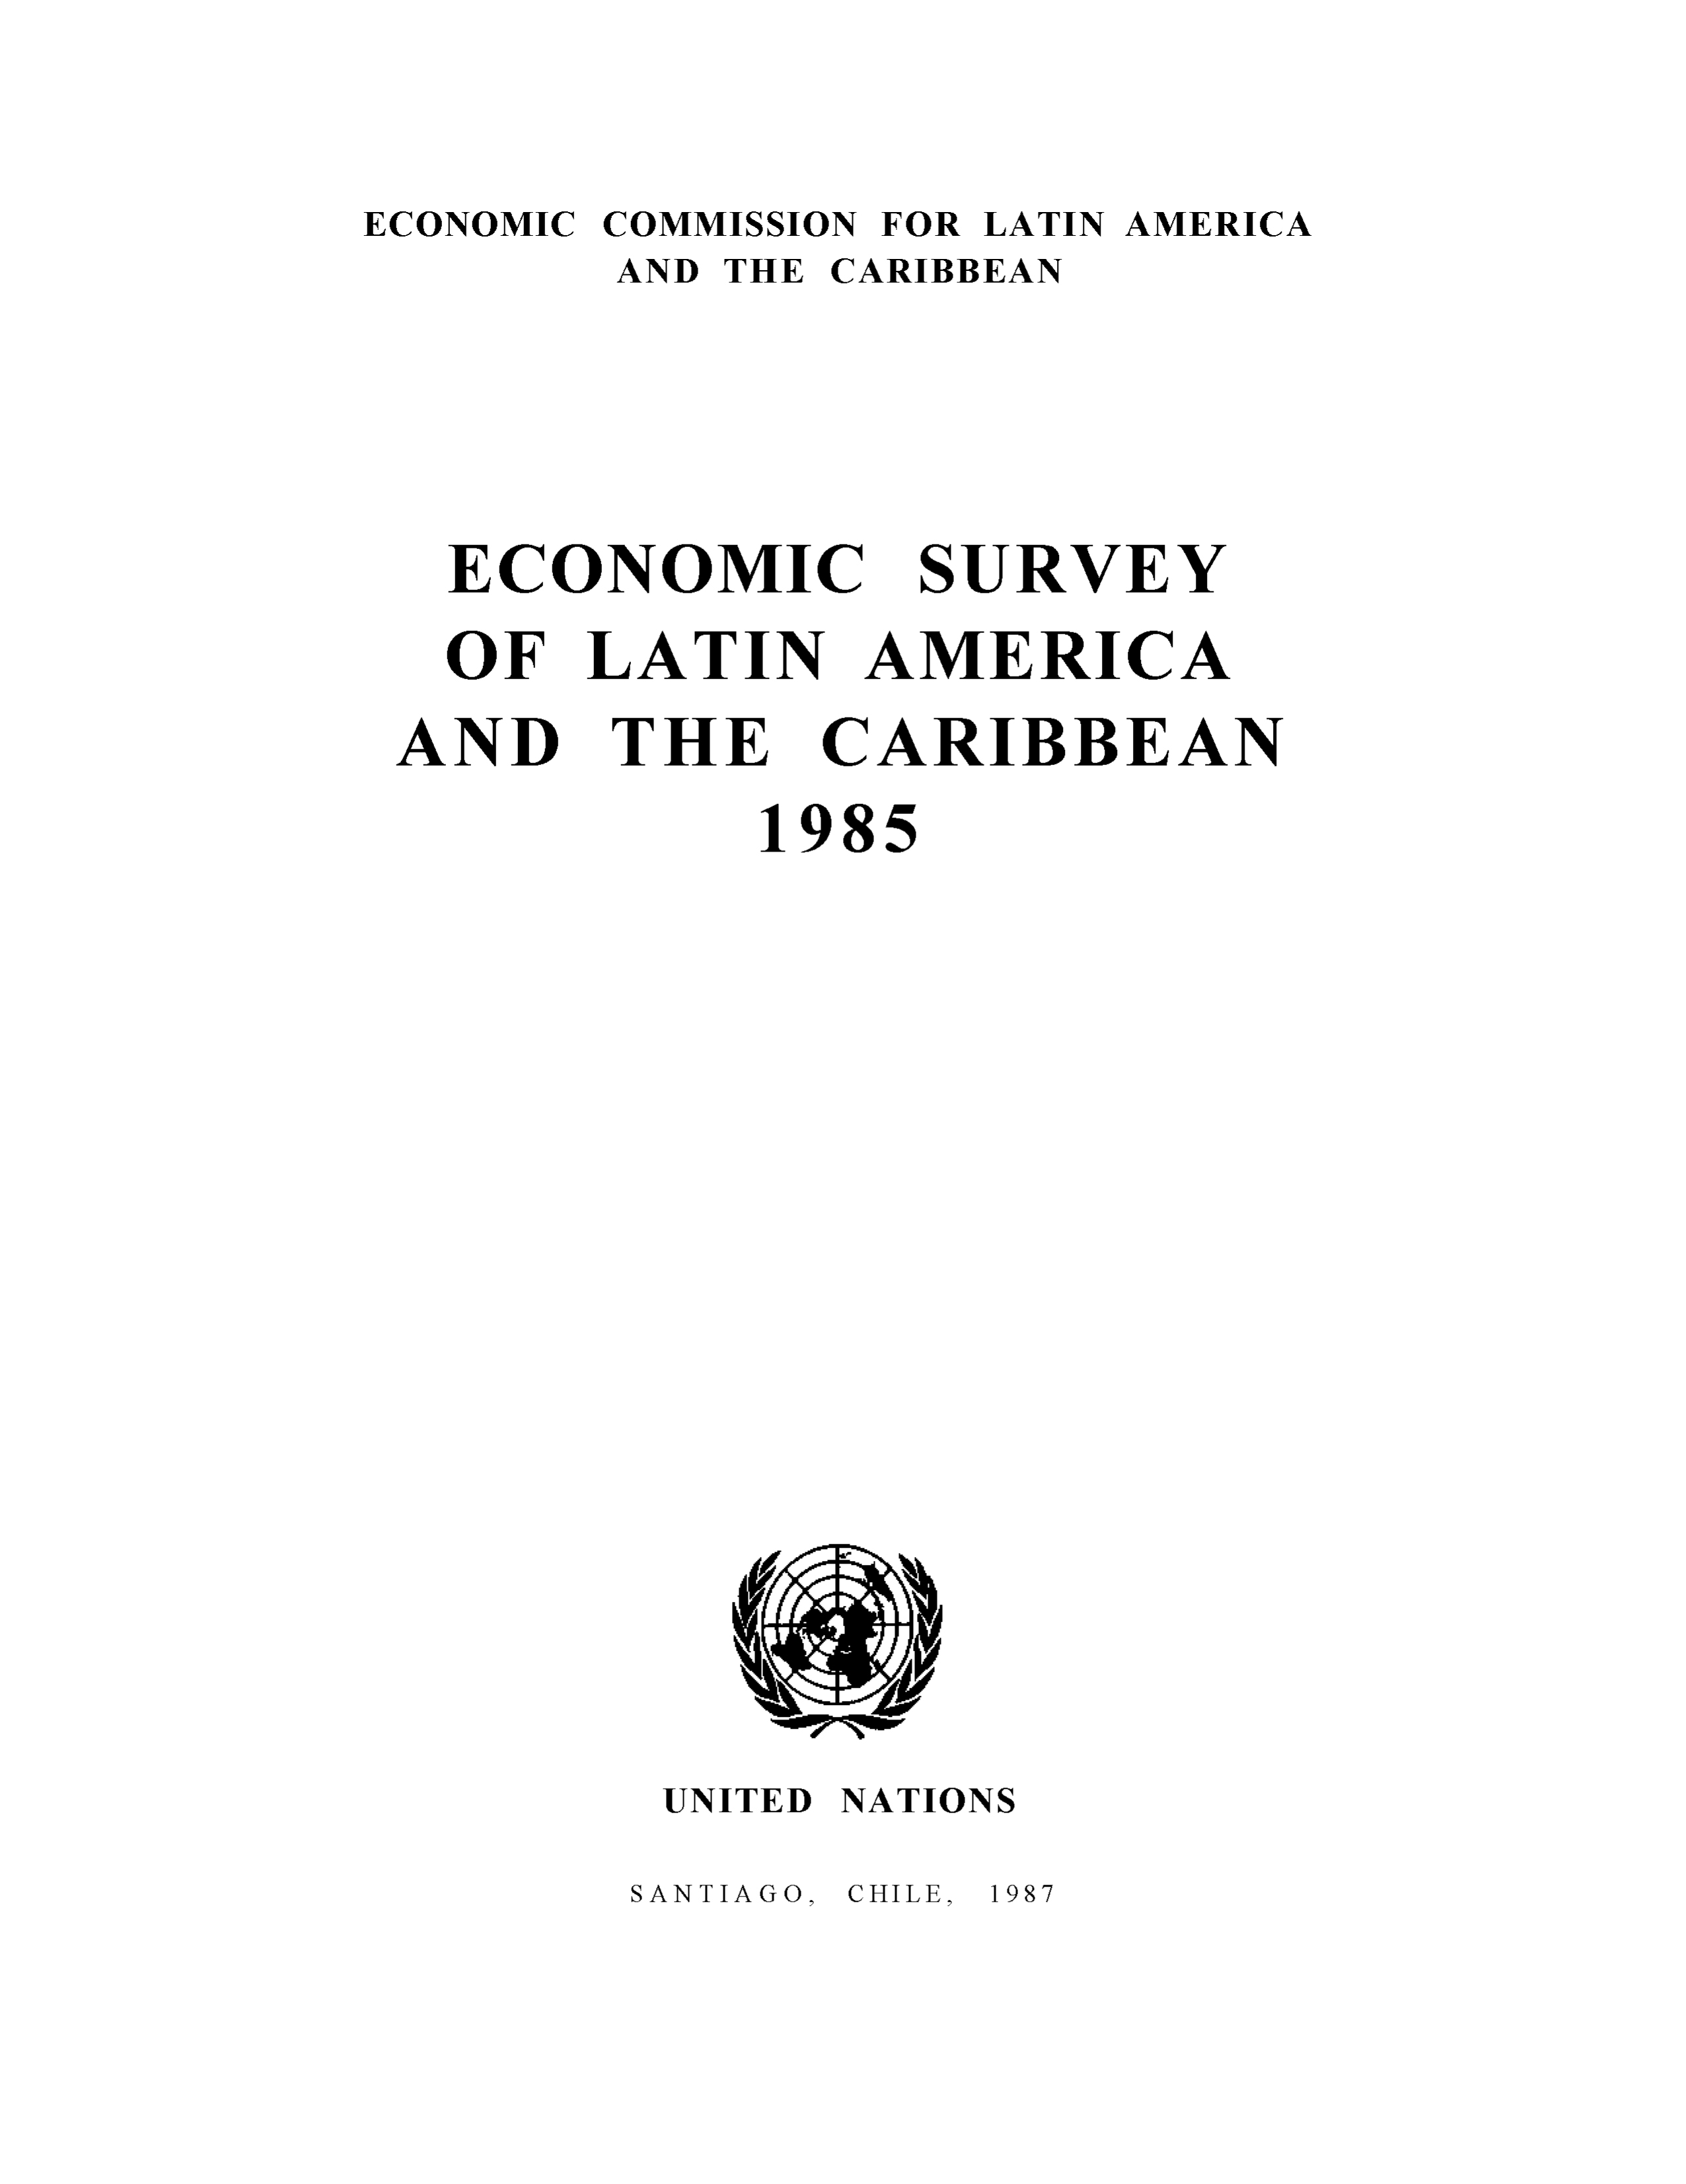 image of Economic Survey of Latin America and the Caribbean 1985